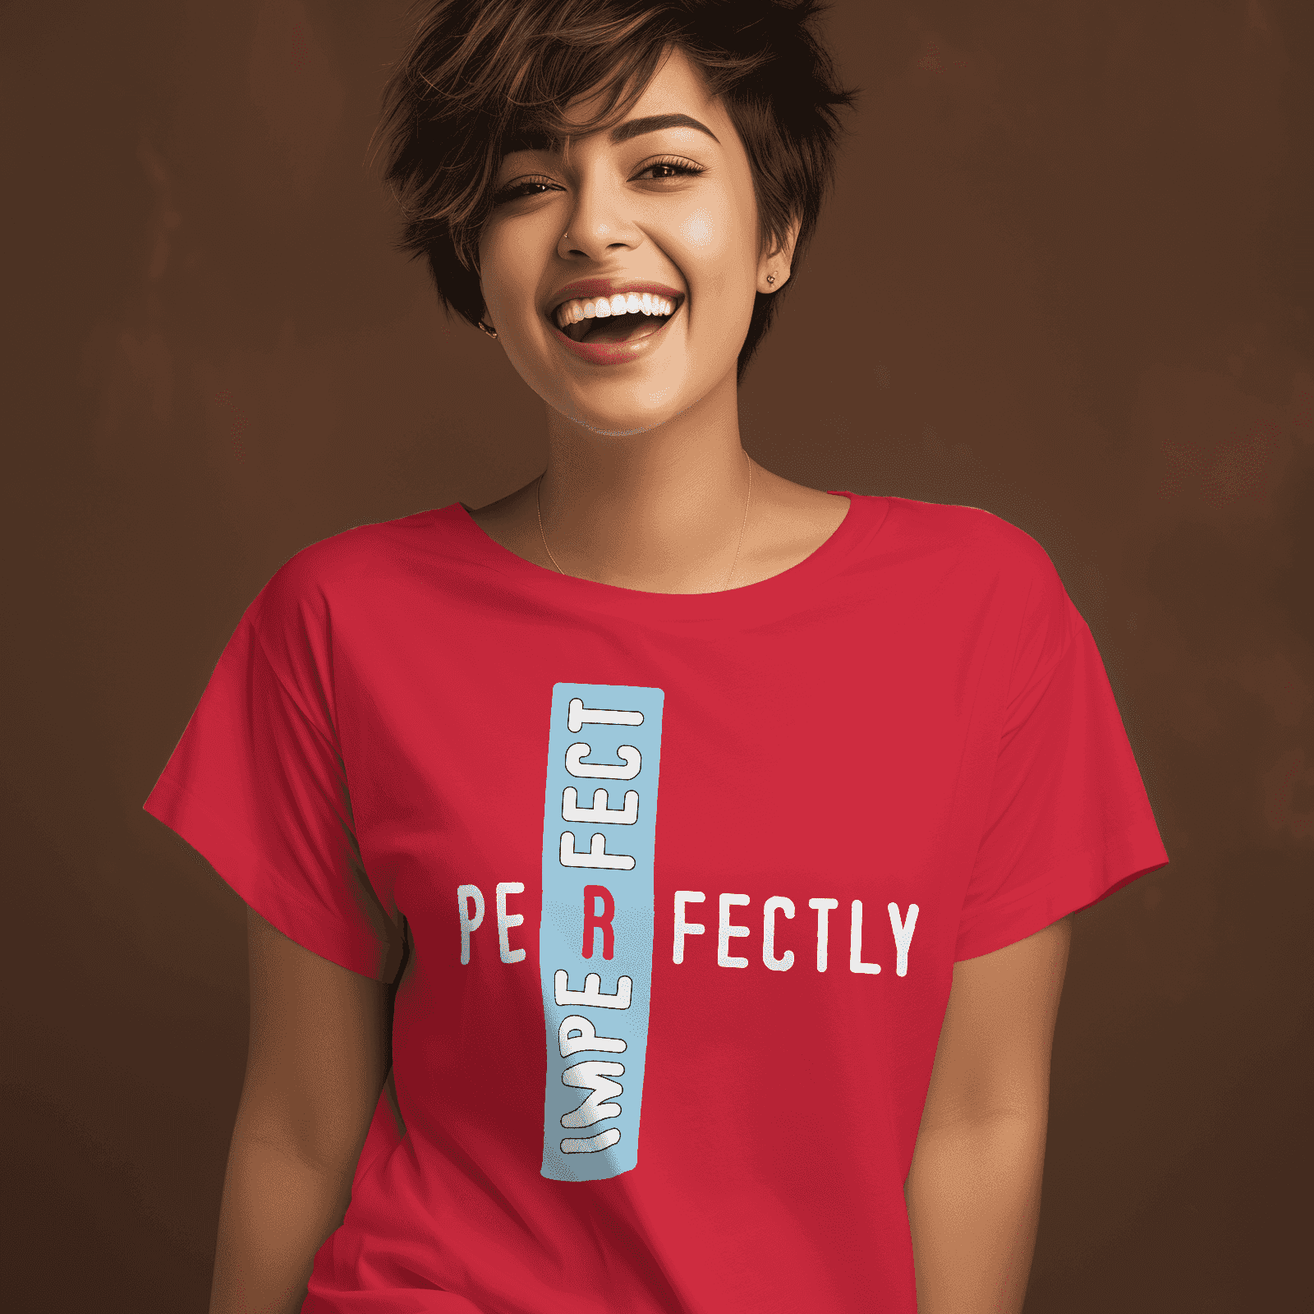 Perfectly Imperfect Women's Empowerment T-Shirt - Embrace Your Unique Beauty